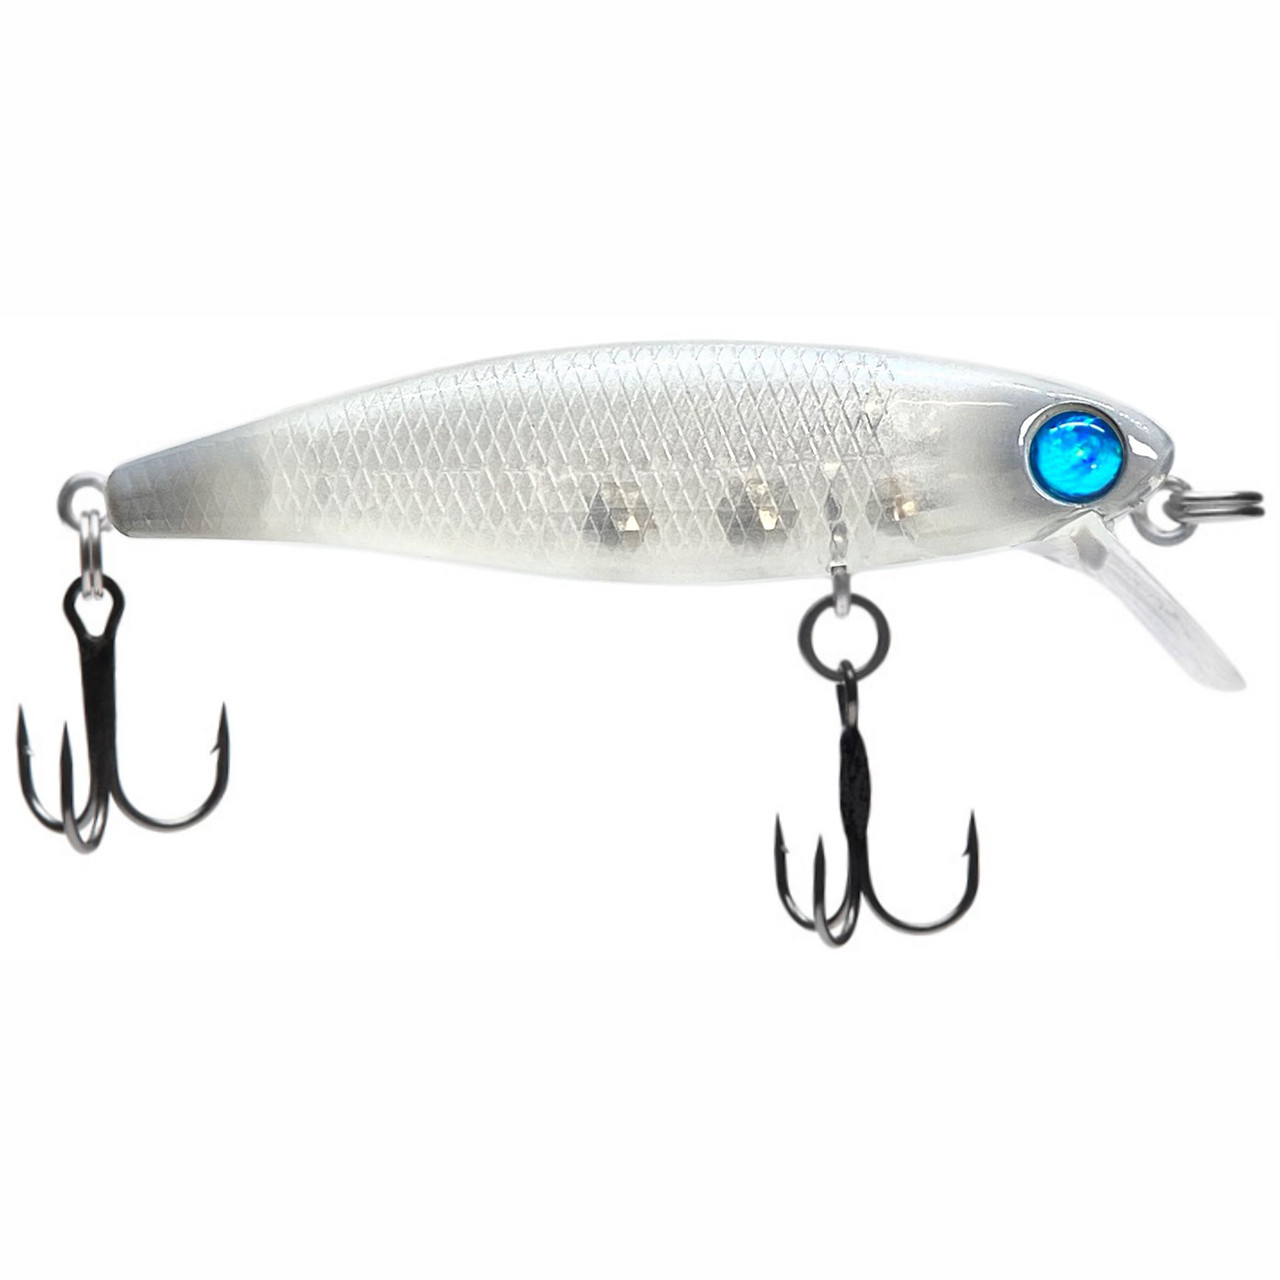 Dynamic Lures HD Trout (Gold Natural) – Trophy Trout Lures and Fly Fishing